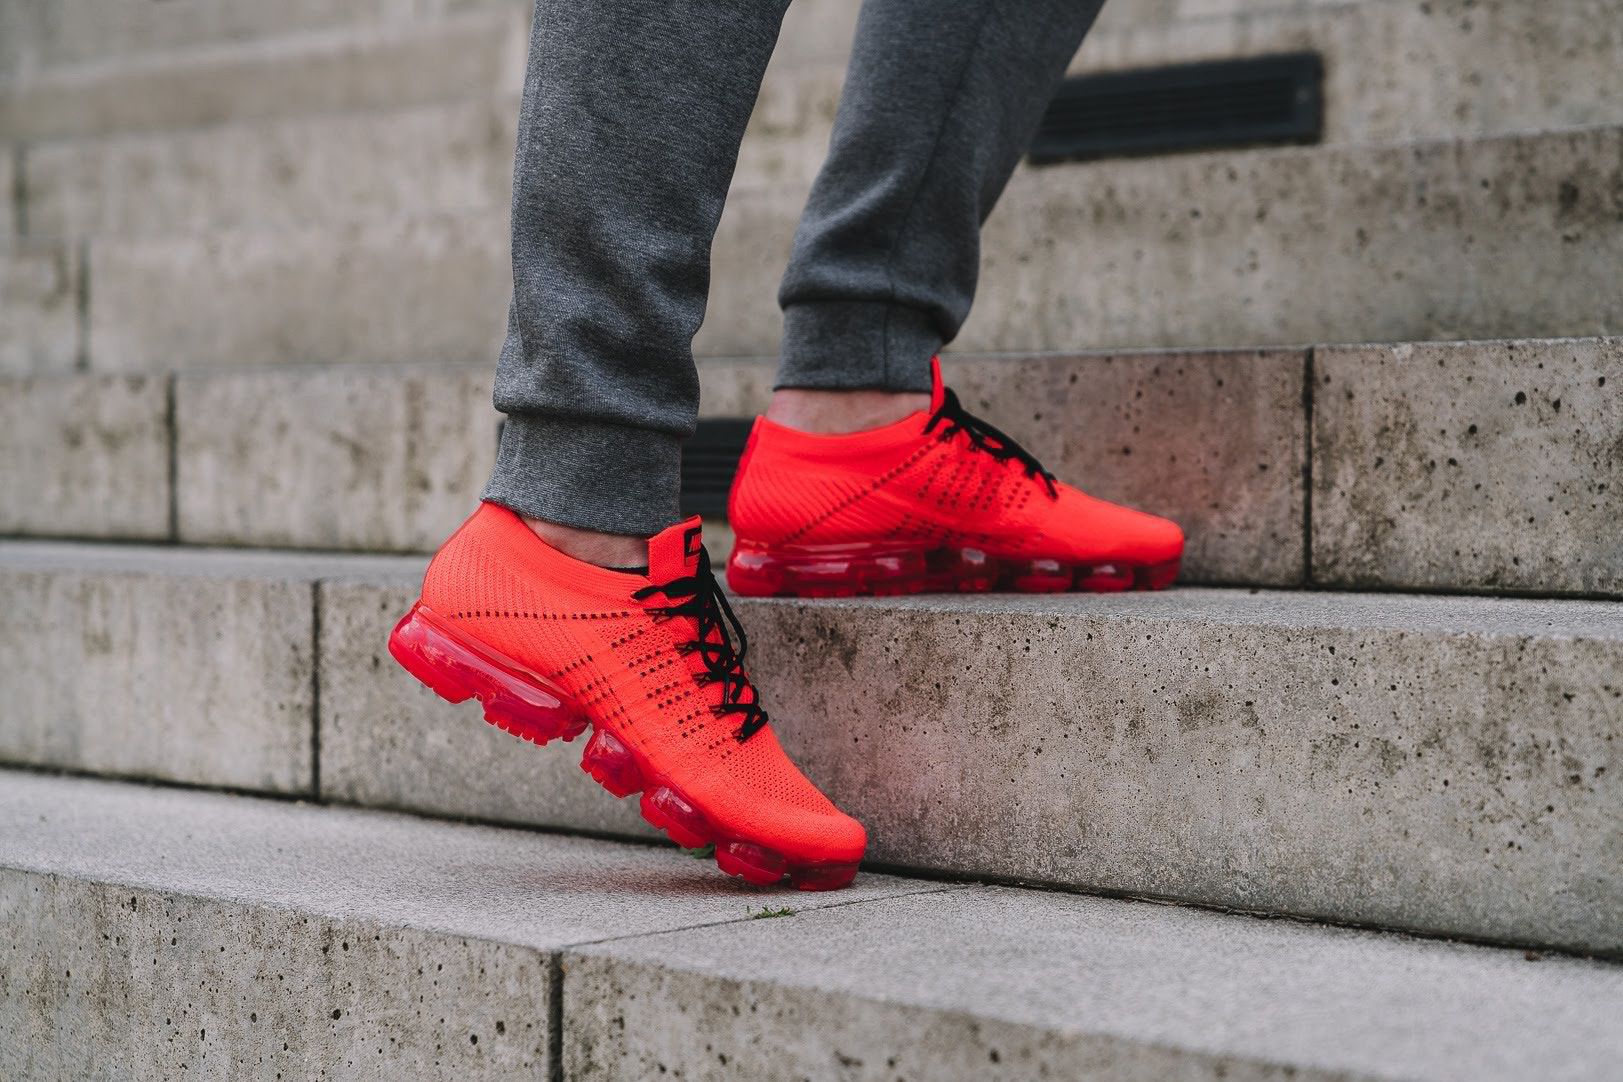 vapormax with red bottom